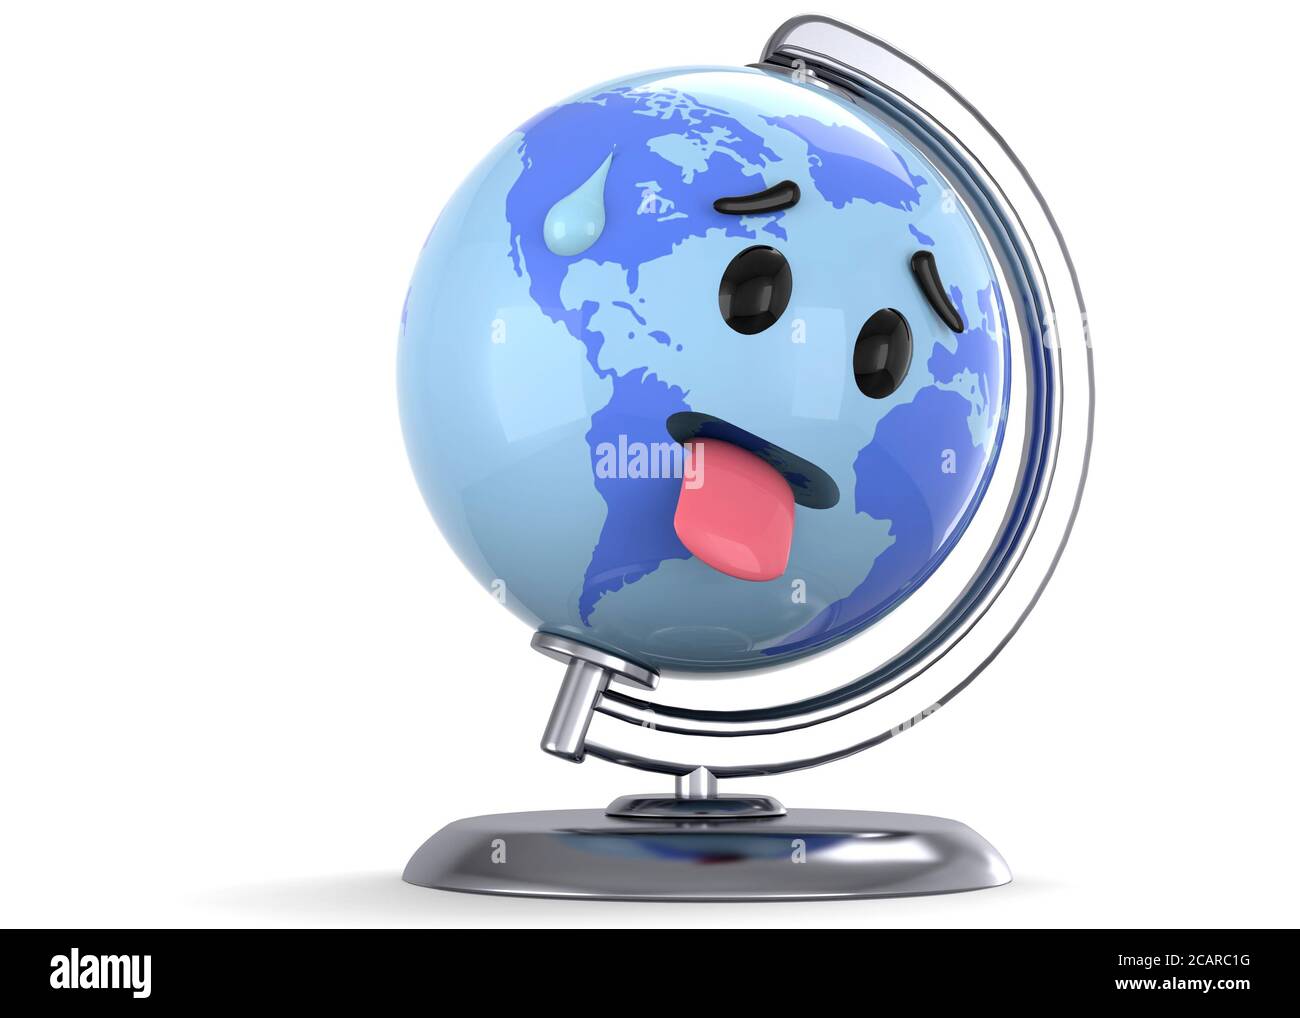 Tired World - 3D Concept Stock Photo